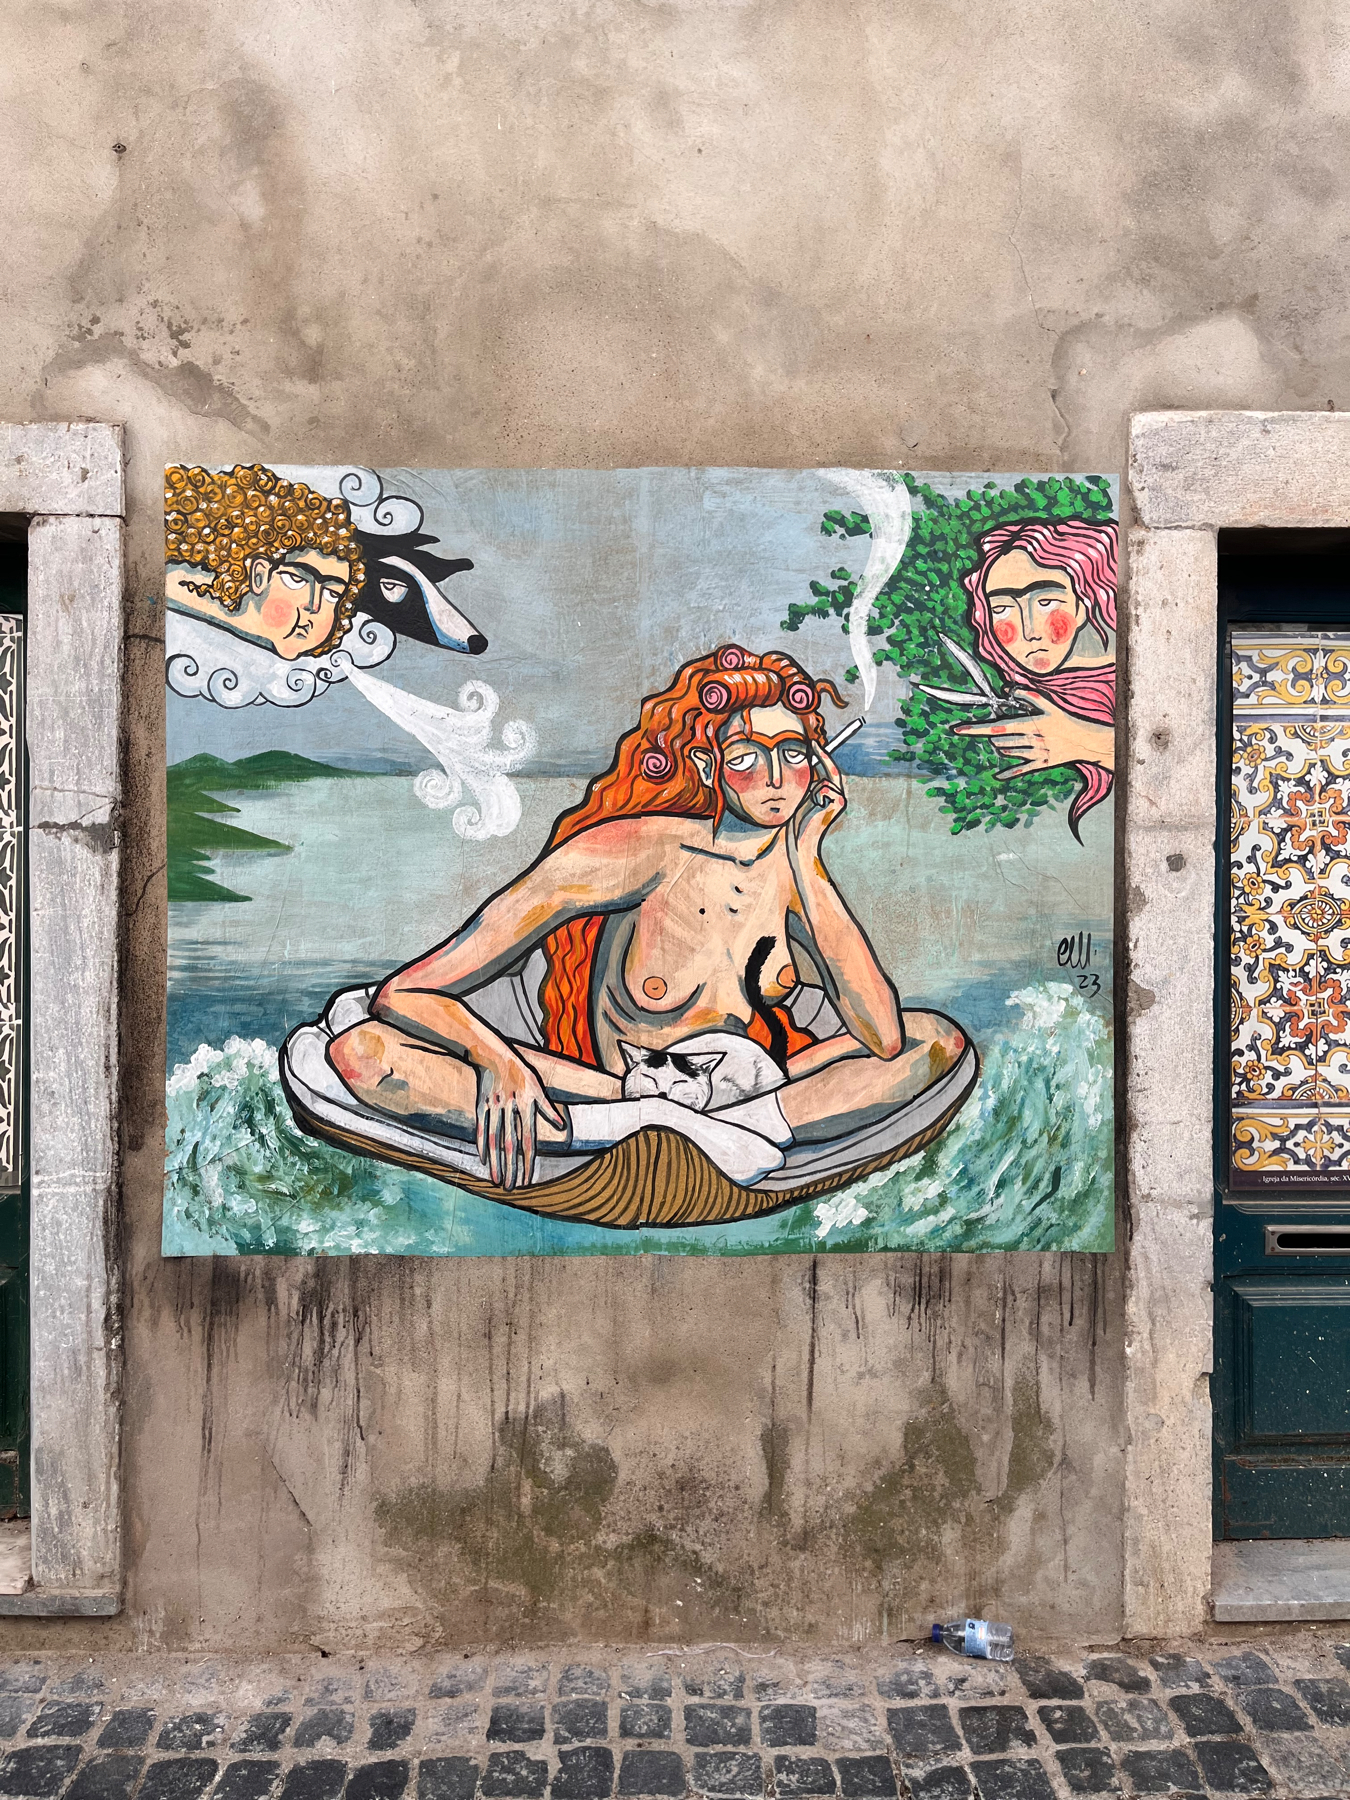 Street art mural depicting a topless woman with red hair and eyeglasses lounging on a lifebuoy in water, accompanied by a white cat, with stylized faces of two people in the clouds above. The artwork is framed by a real door